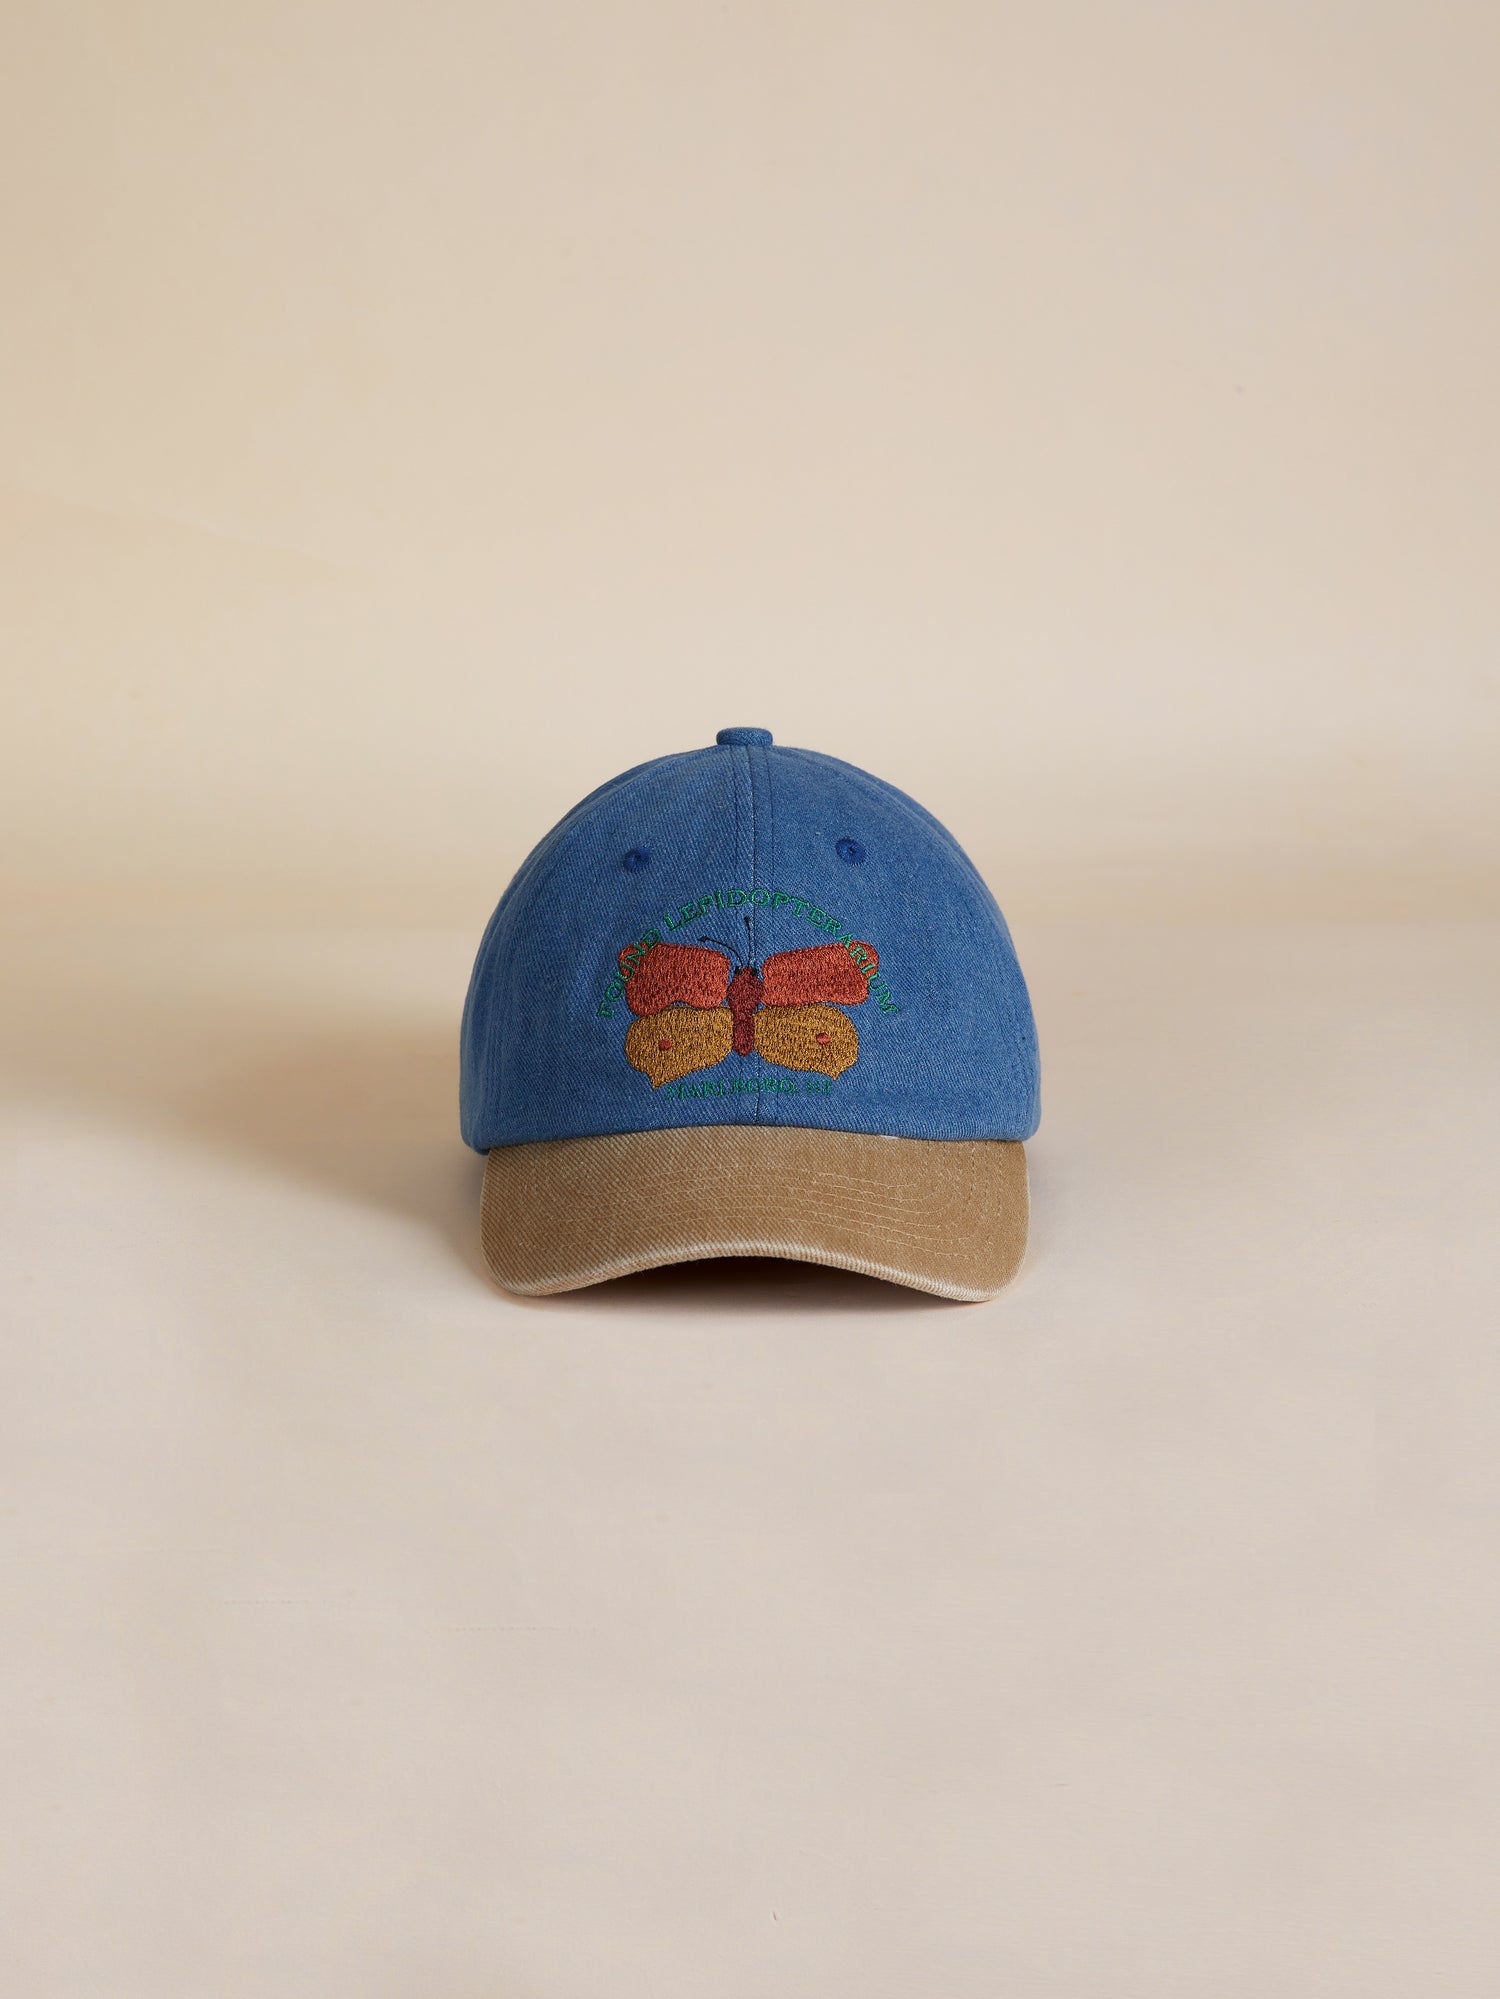 A Butterfly House Denim Cap with a butterfly embroidered on it, from Found.